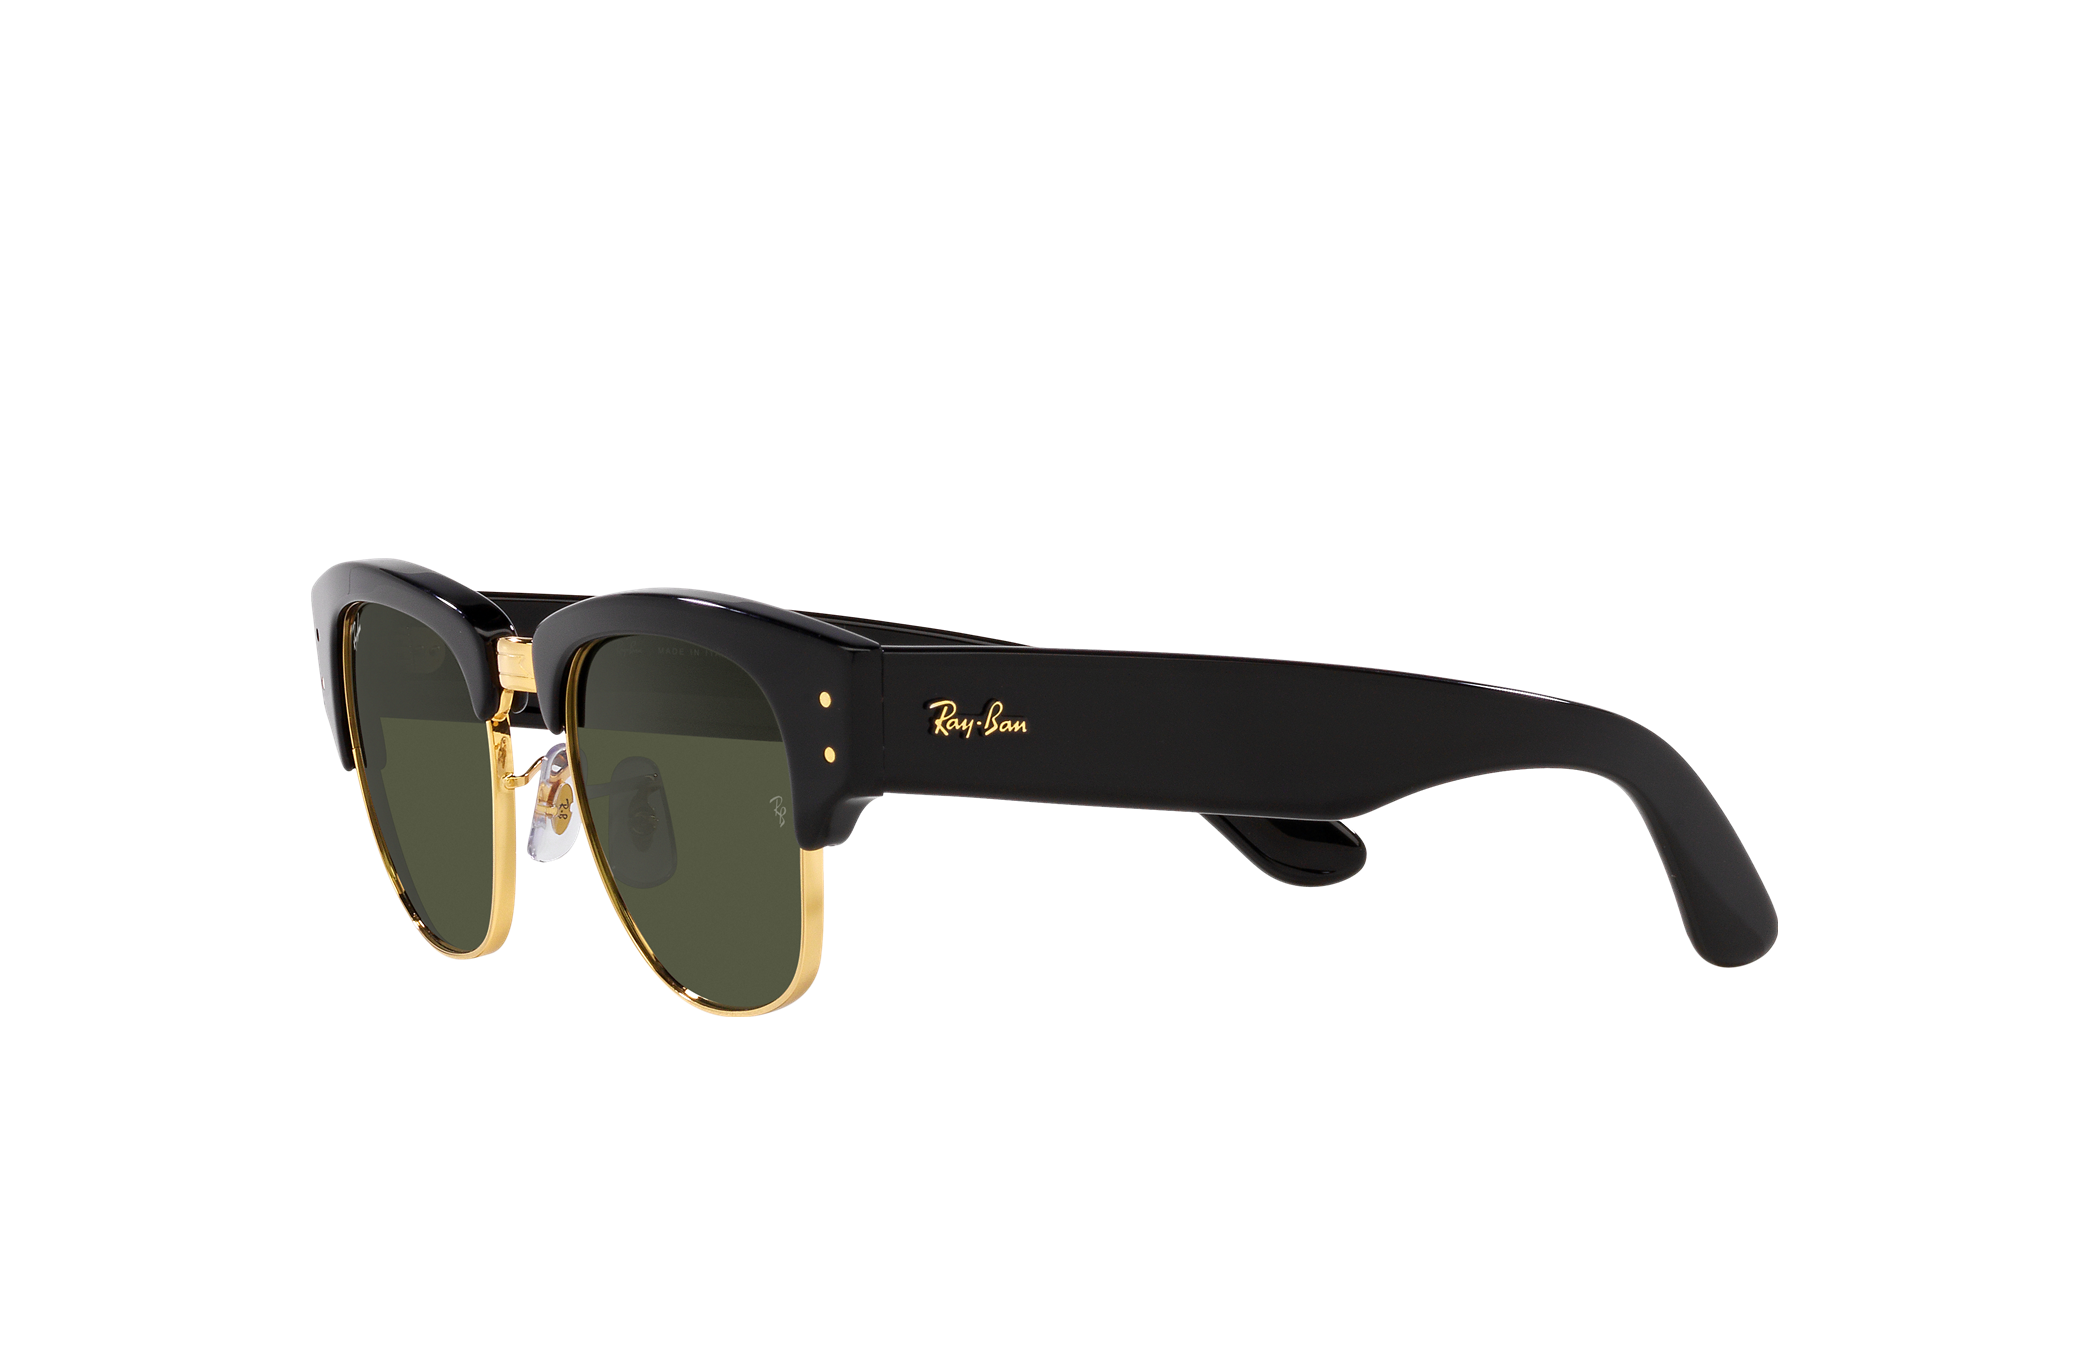 Everything You Need to Know Before You Buy Ray-Ban Sunglasses | Gear Patrol